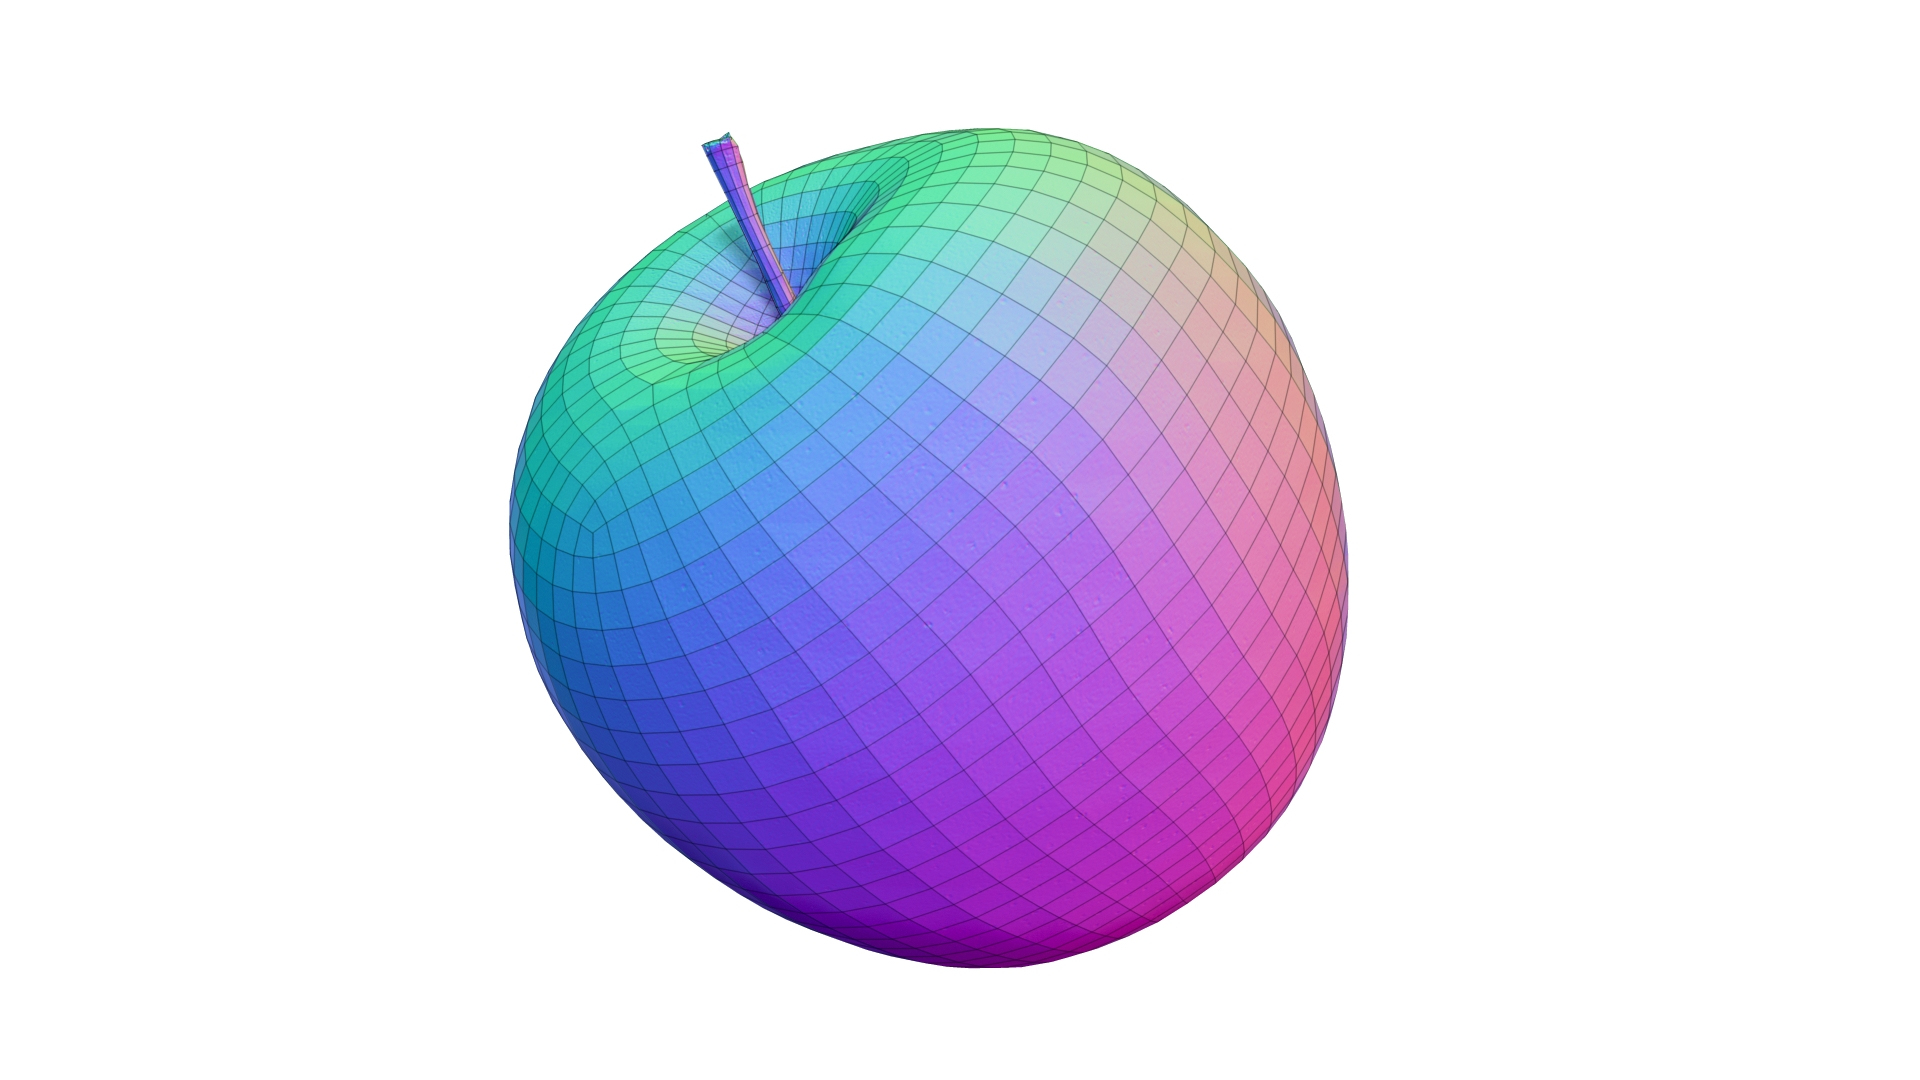 Green Apple - Real-Time 3D Scanned 3D - TurboSquid 1734010